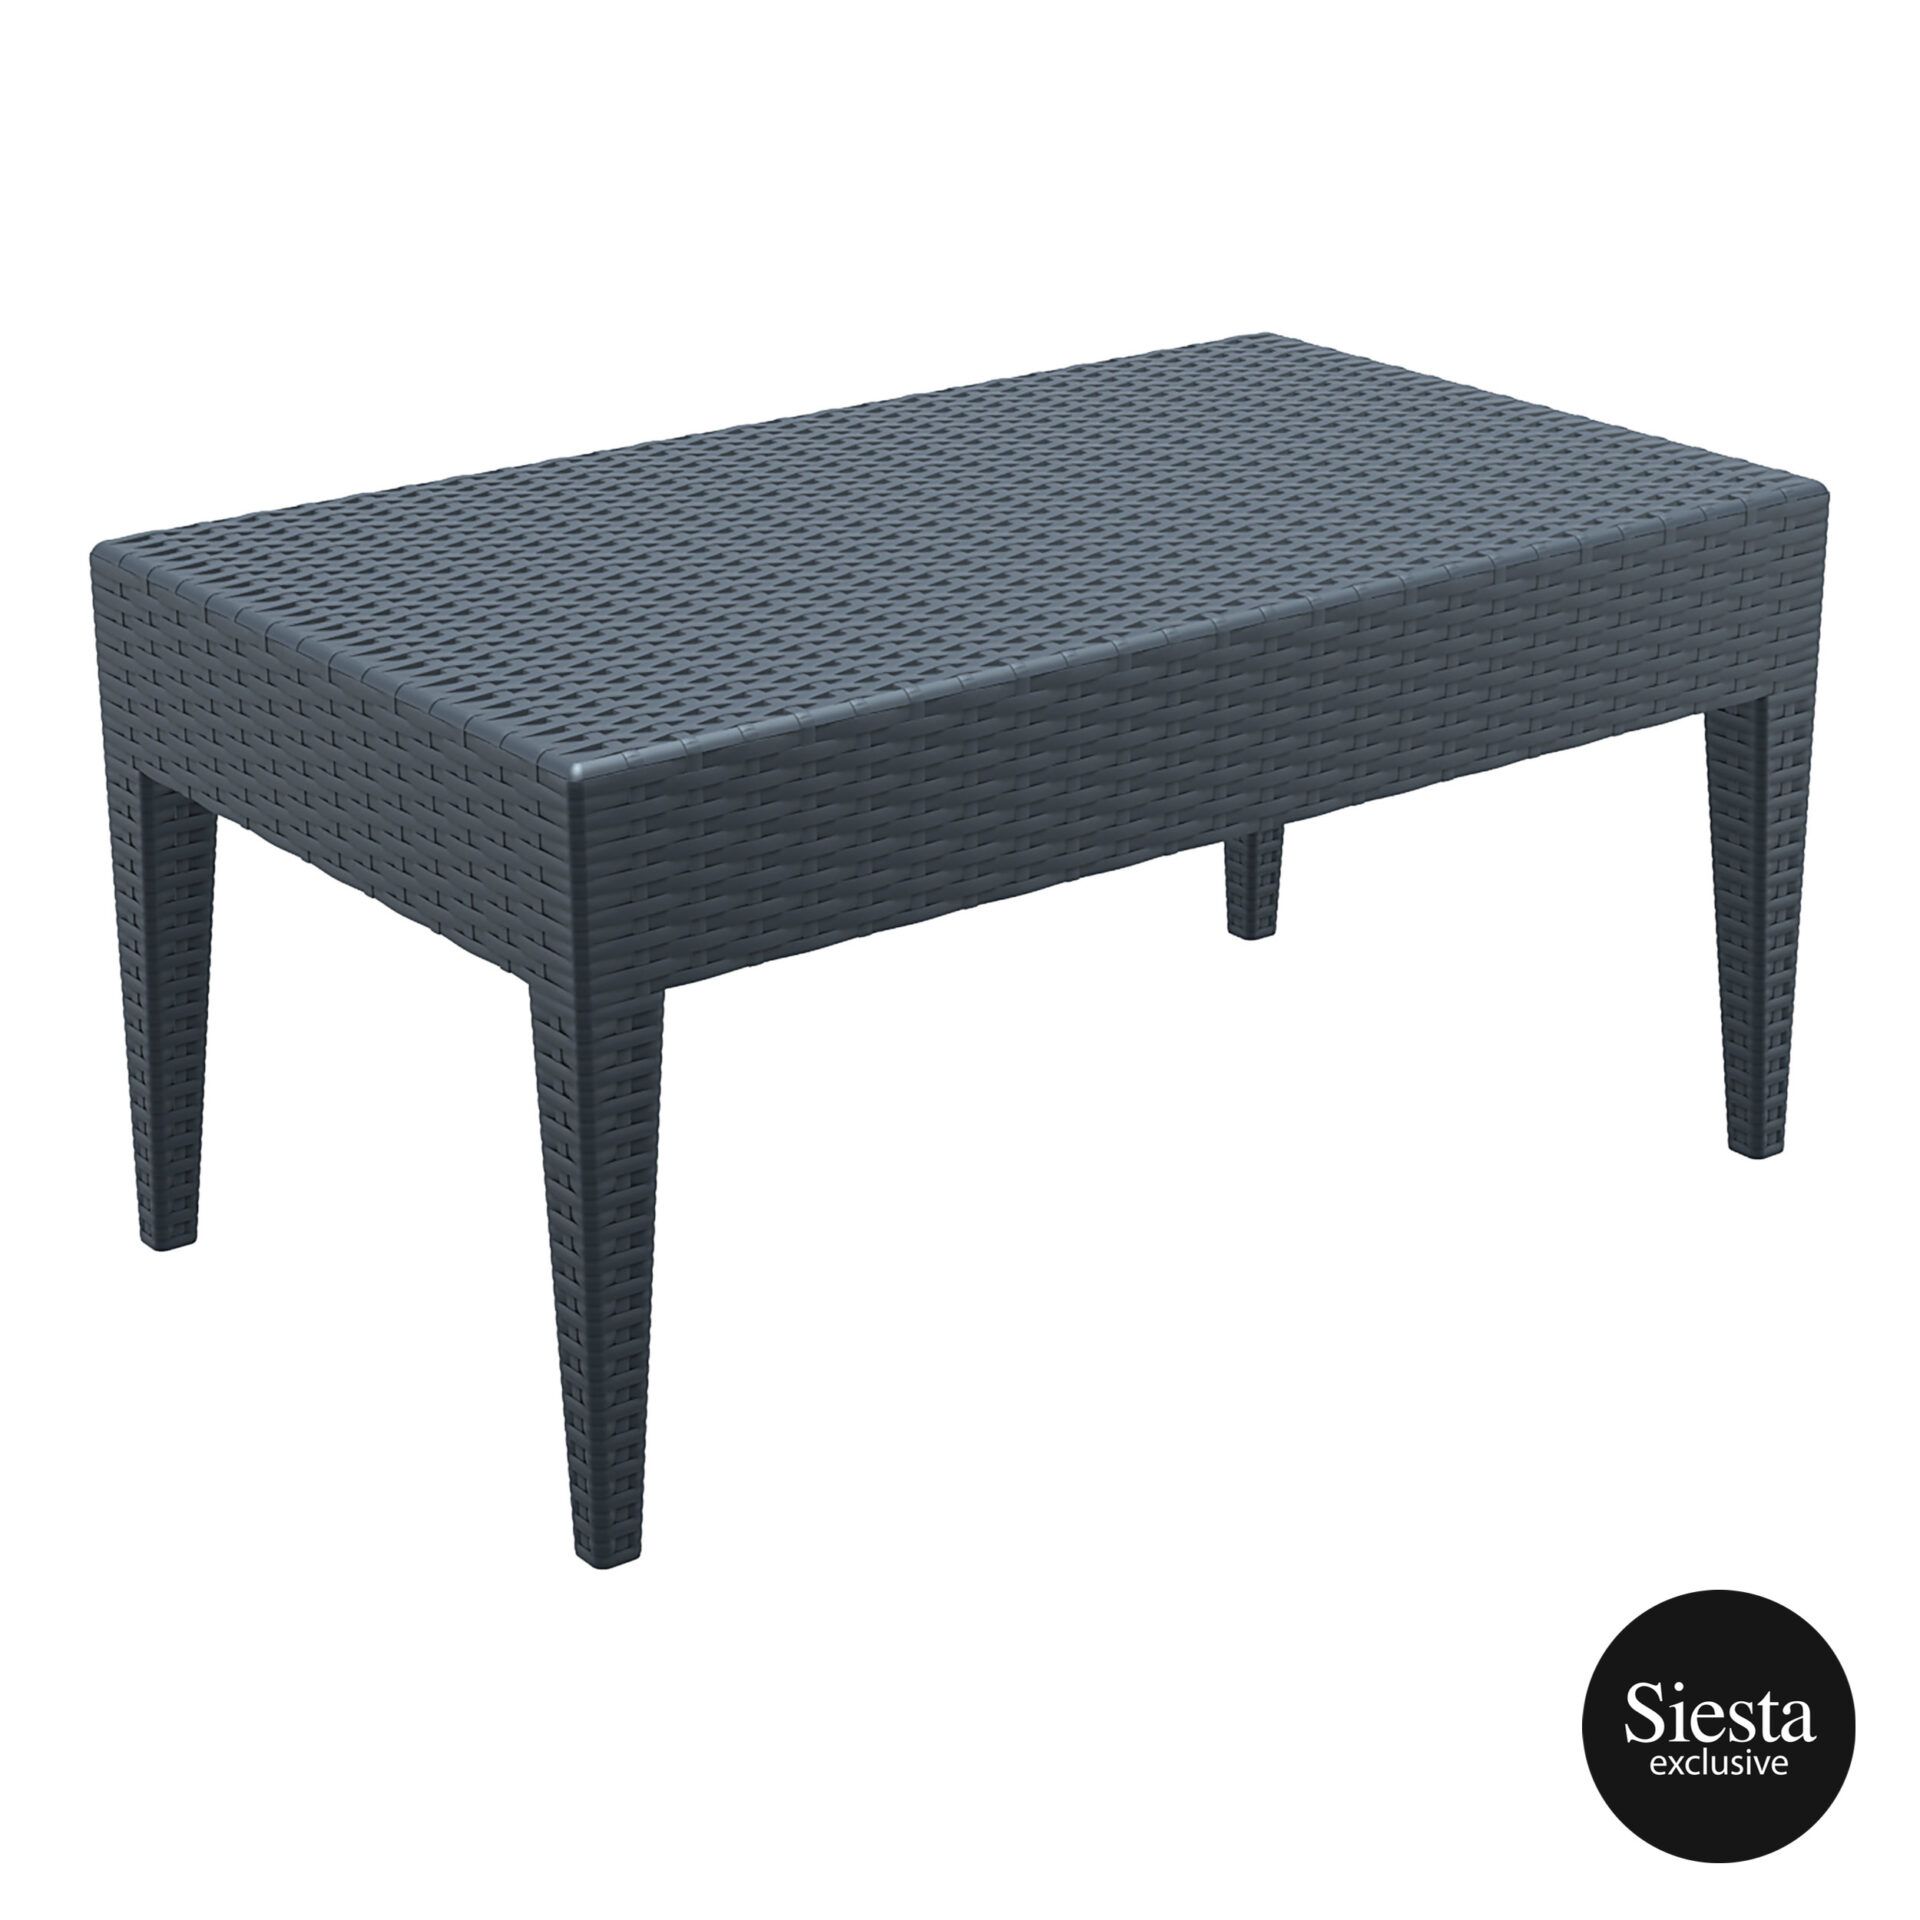 Resin Rattan Miami Tequila Lounge table darkgrey front side